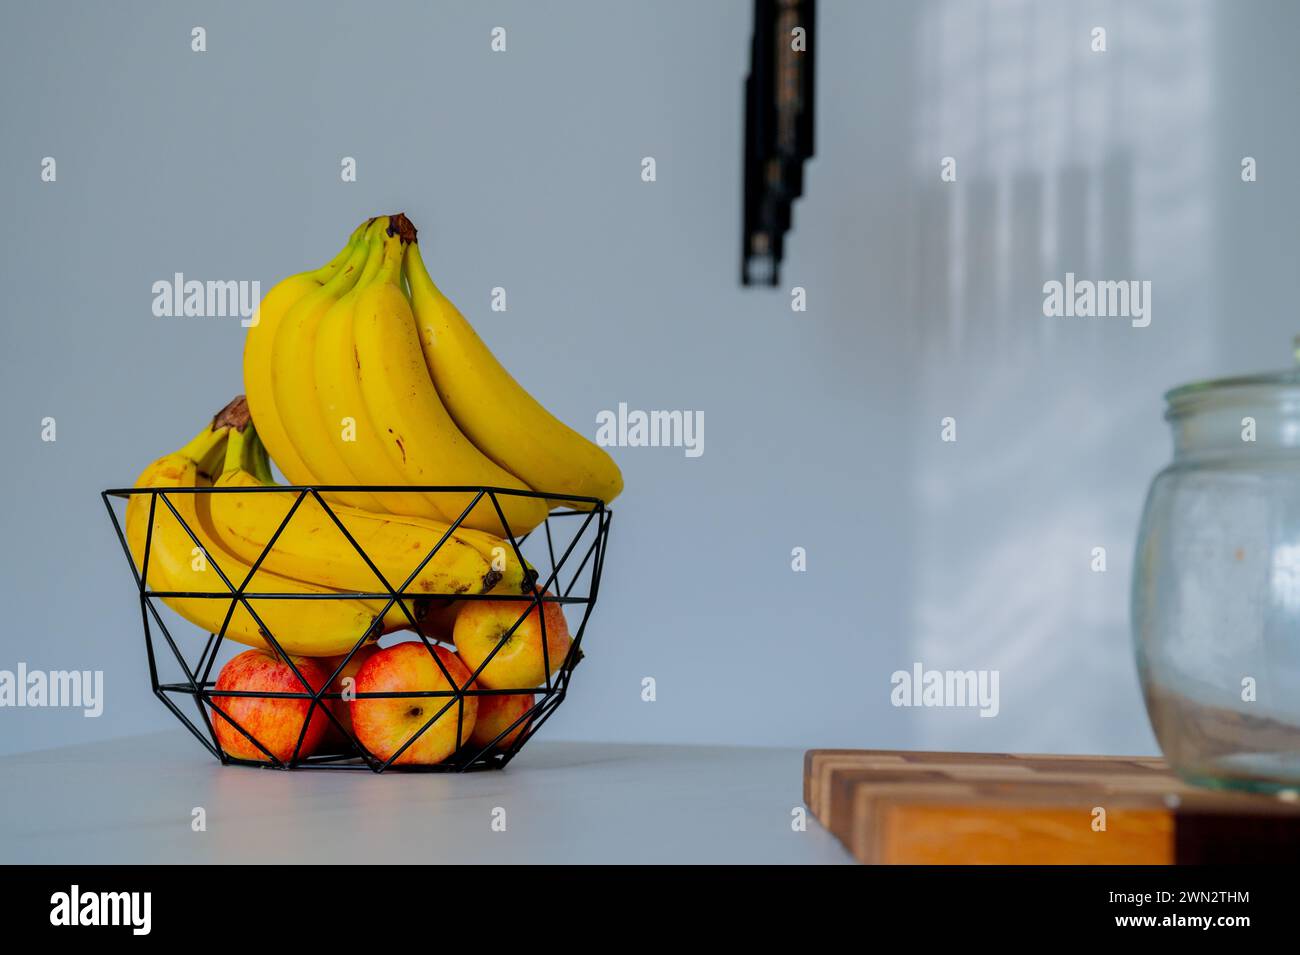 A glass bowl on the kitchen counter cradles a banana in gentle daylight Stock Photo